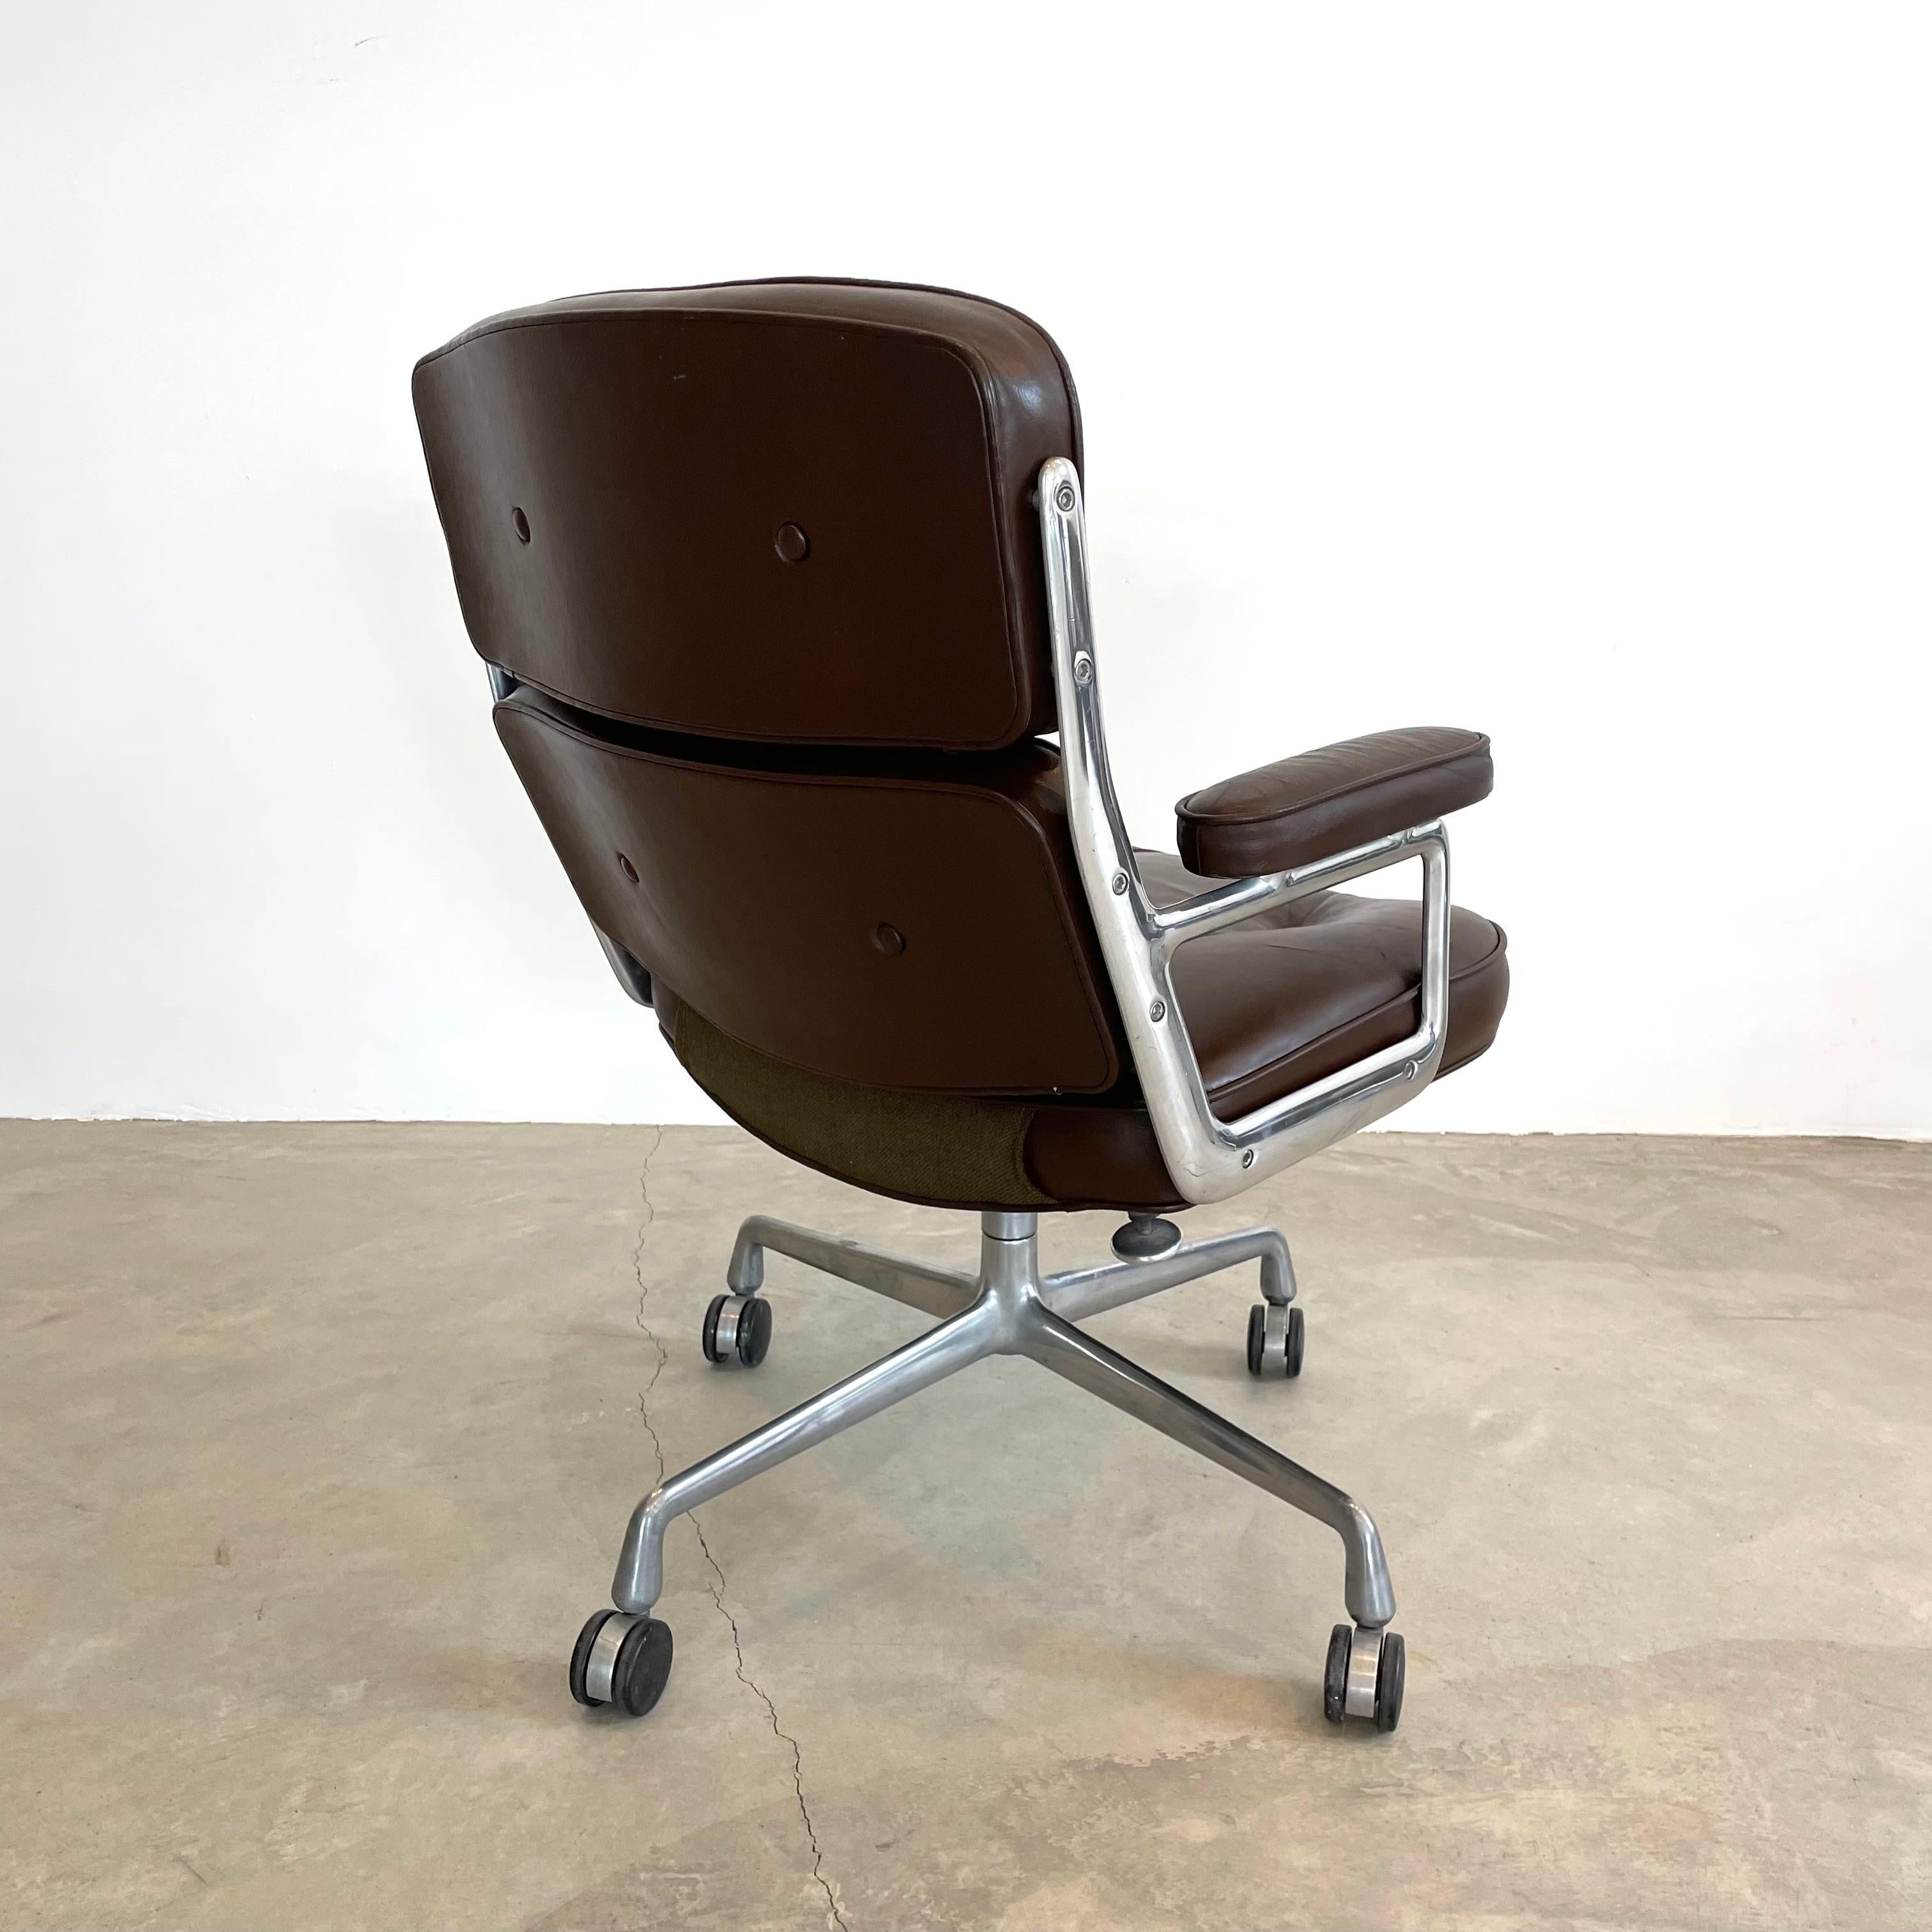 American Eames Time Life Chair in Chocolate Leather for Herman Miller, 1978 USA For Sale